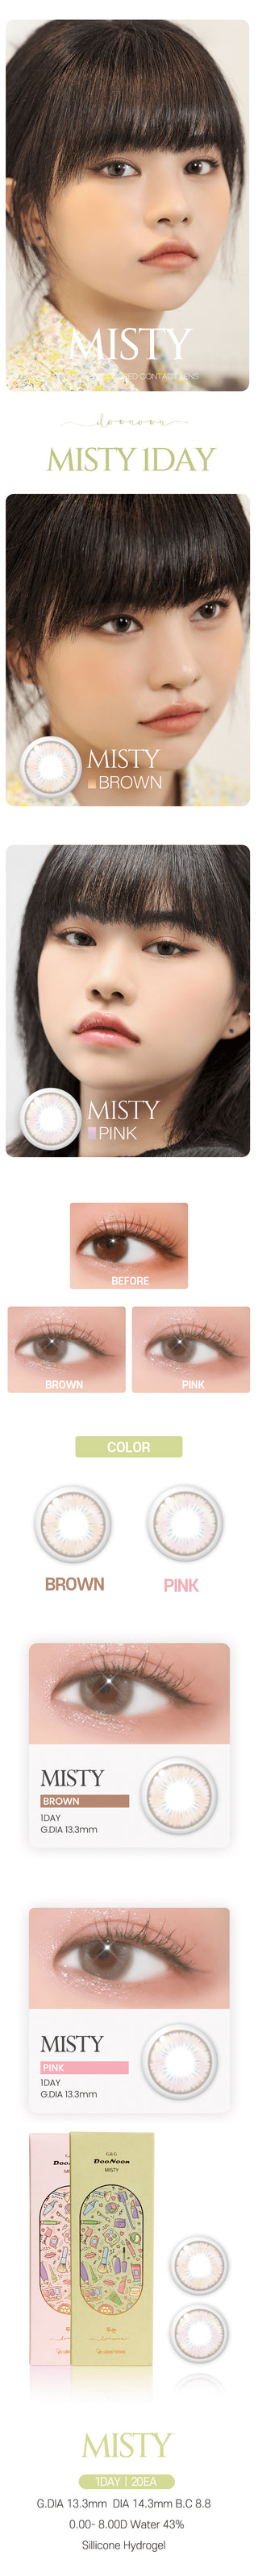 Variety of DooNoon Misty Pink (20pk) contact lens colors displayed, with closeups of an eye wearing the contact lens colors, and with a model wearing the contact lens colors showing realistic eye-enlarging effect from various angles.